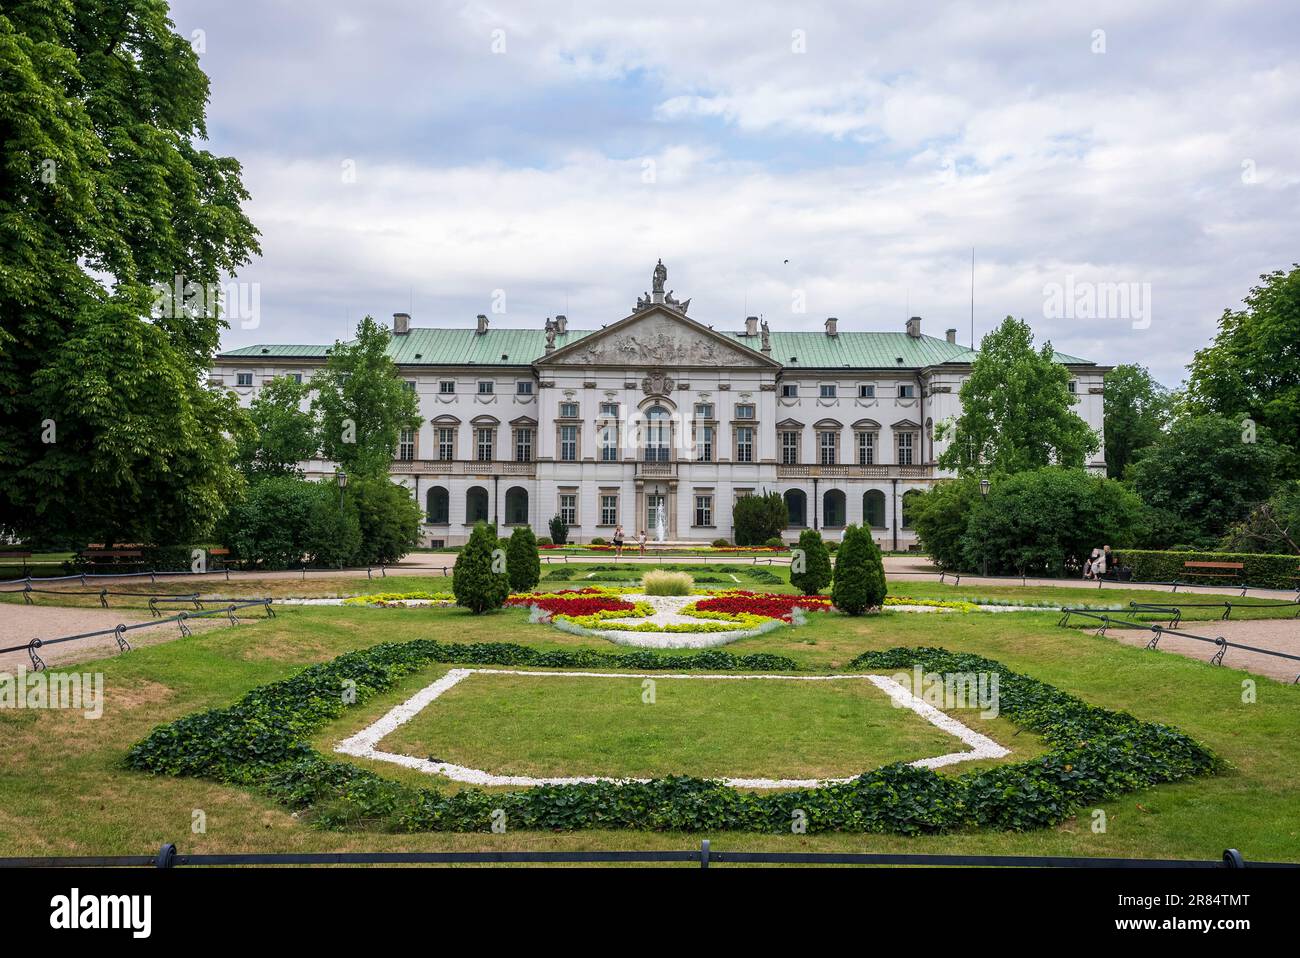 Wonderful view of Krasinski Palace and Garden, Warsaw, the capital and largest city of Poland Stock Photo